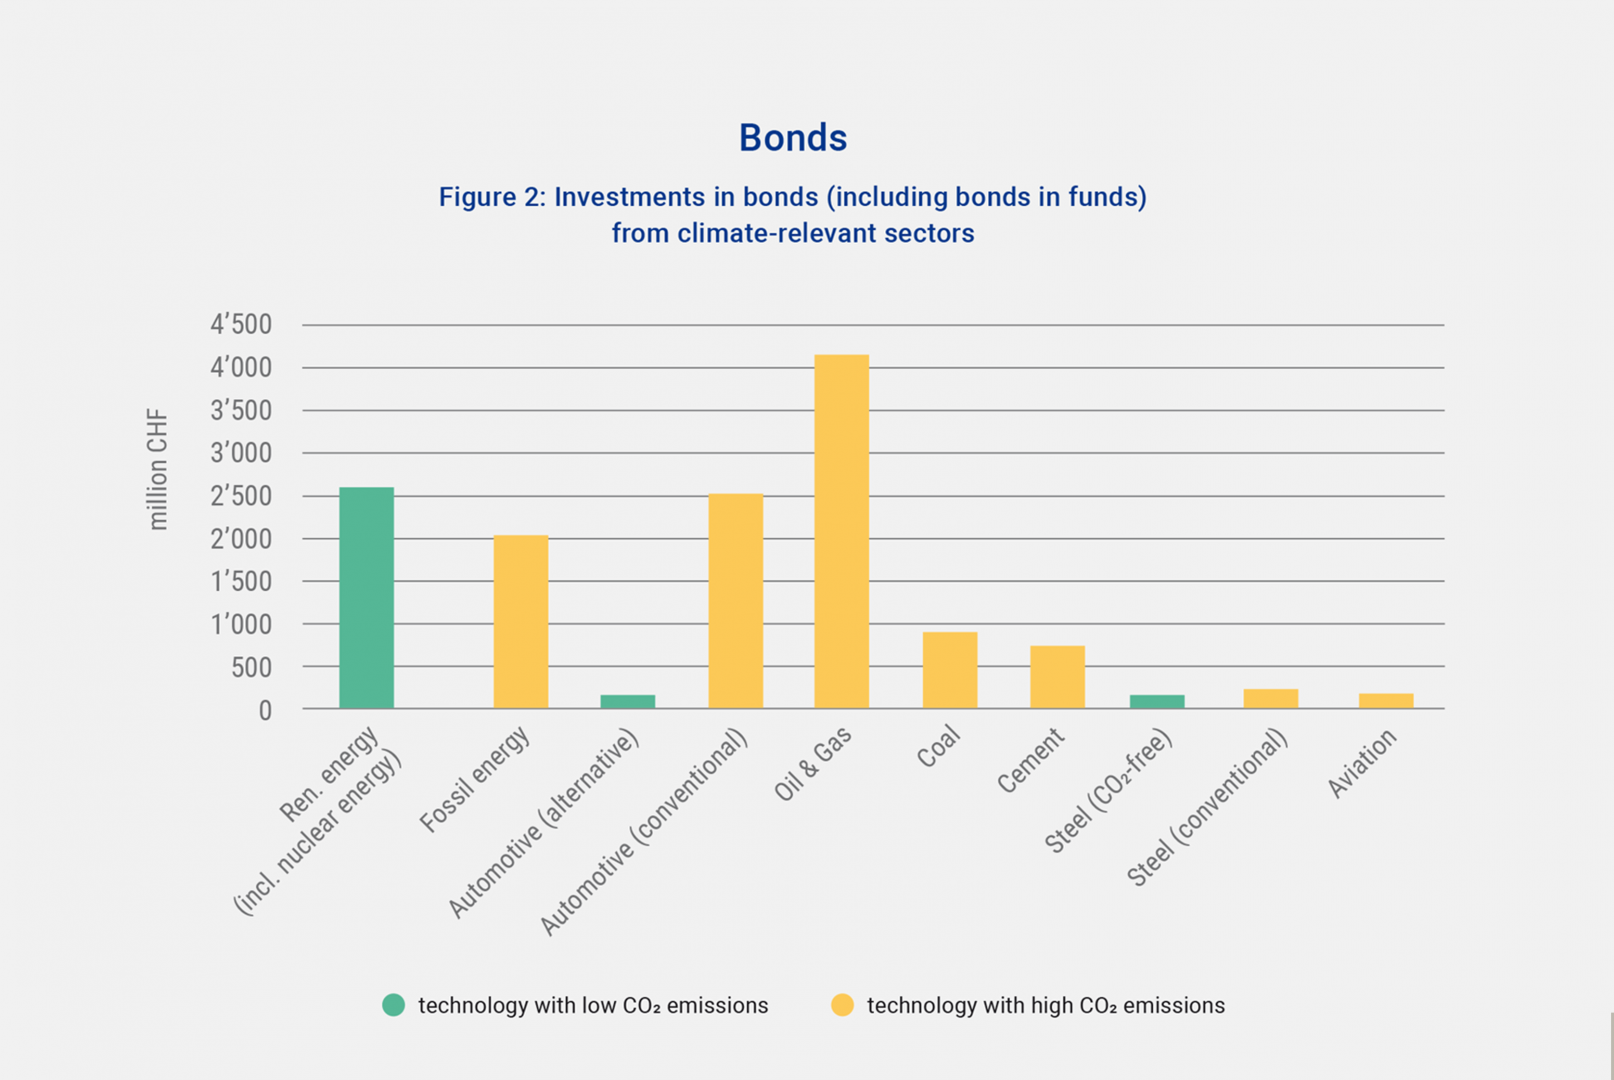 Investment in bonds from climate-relevant sectors